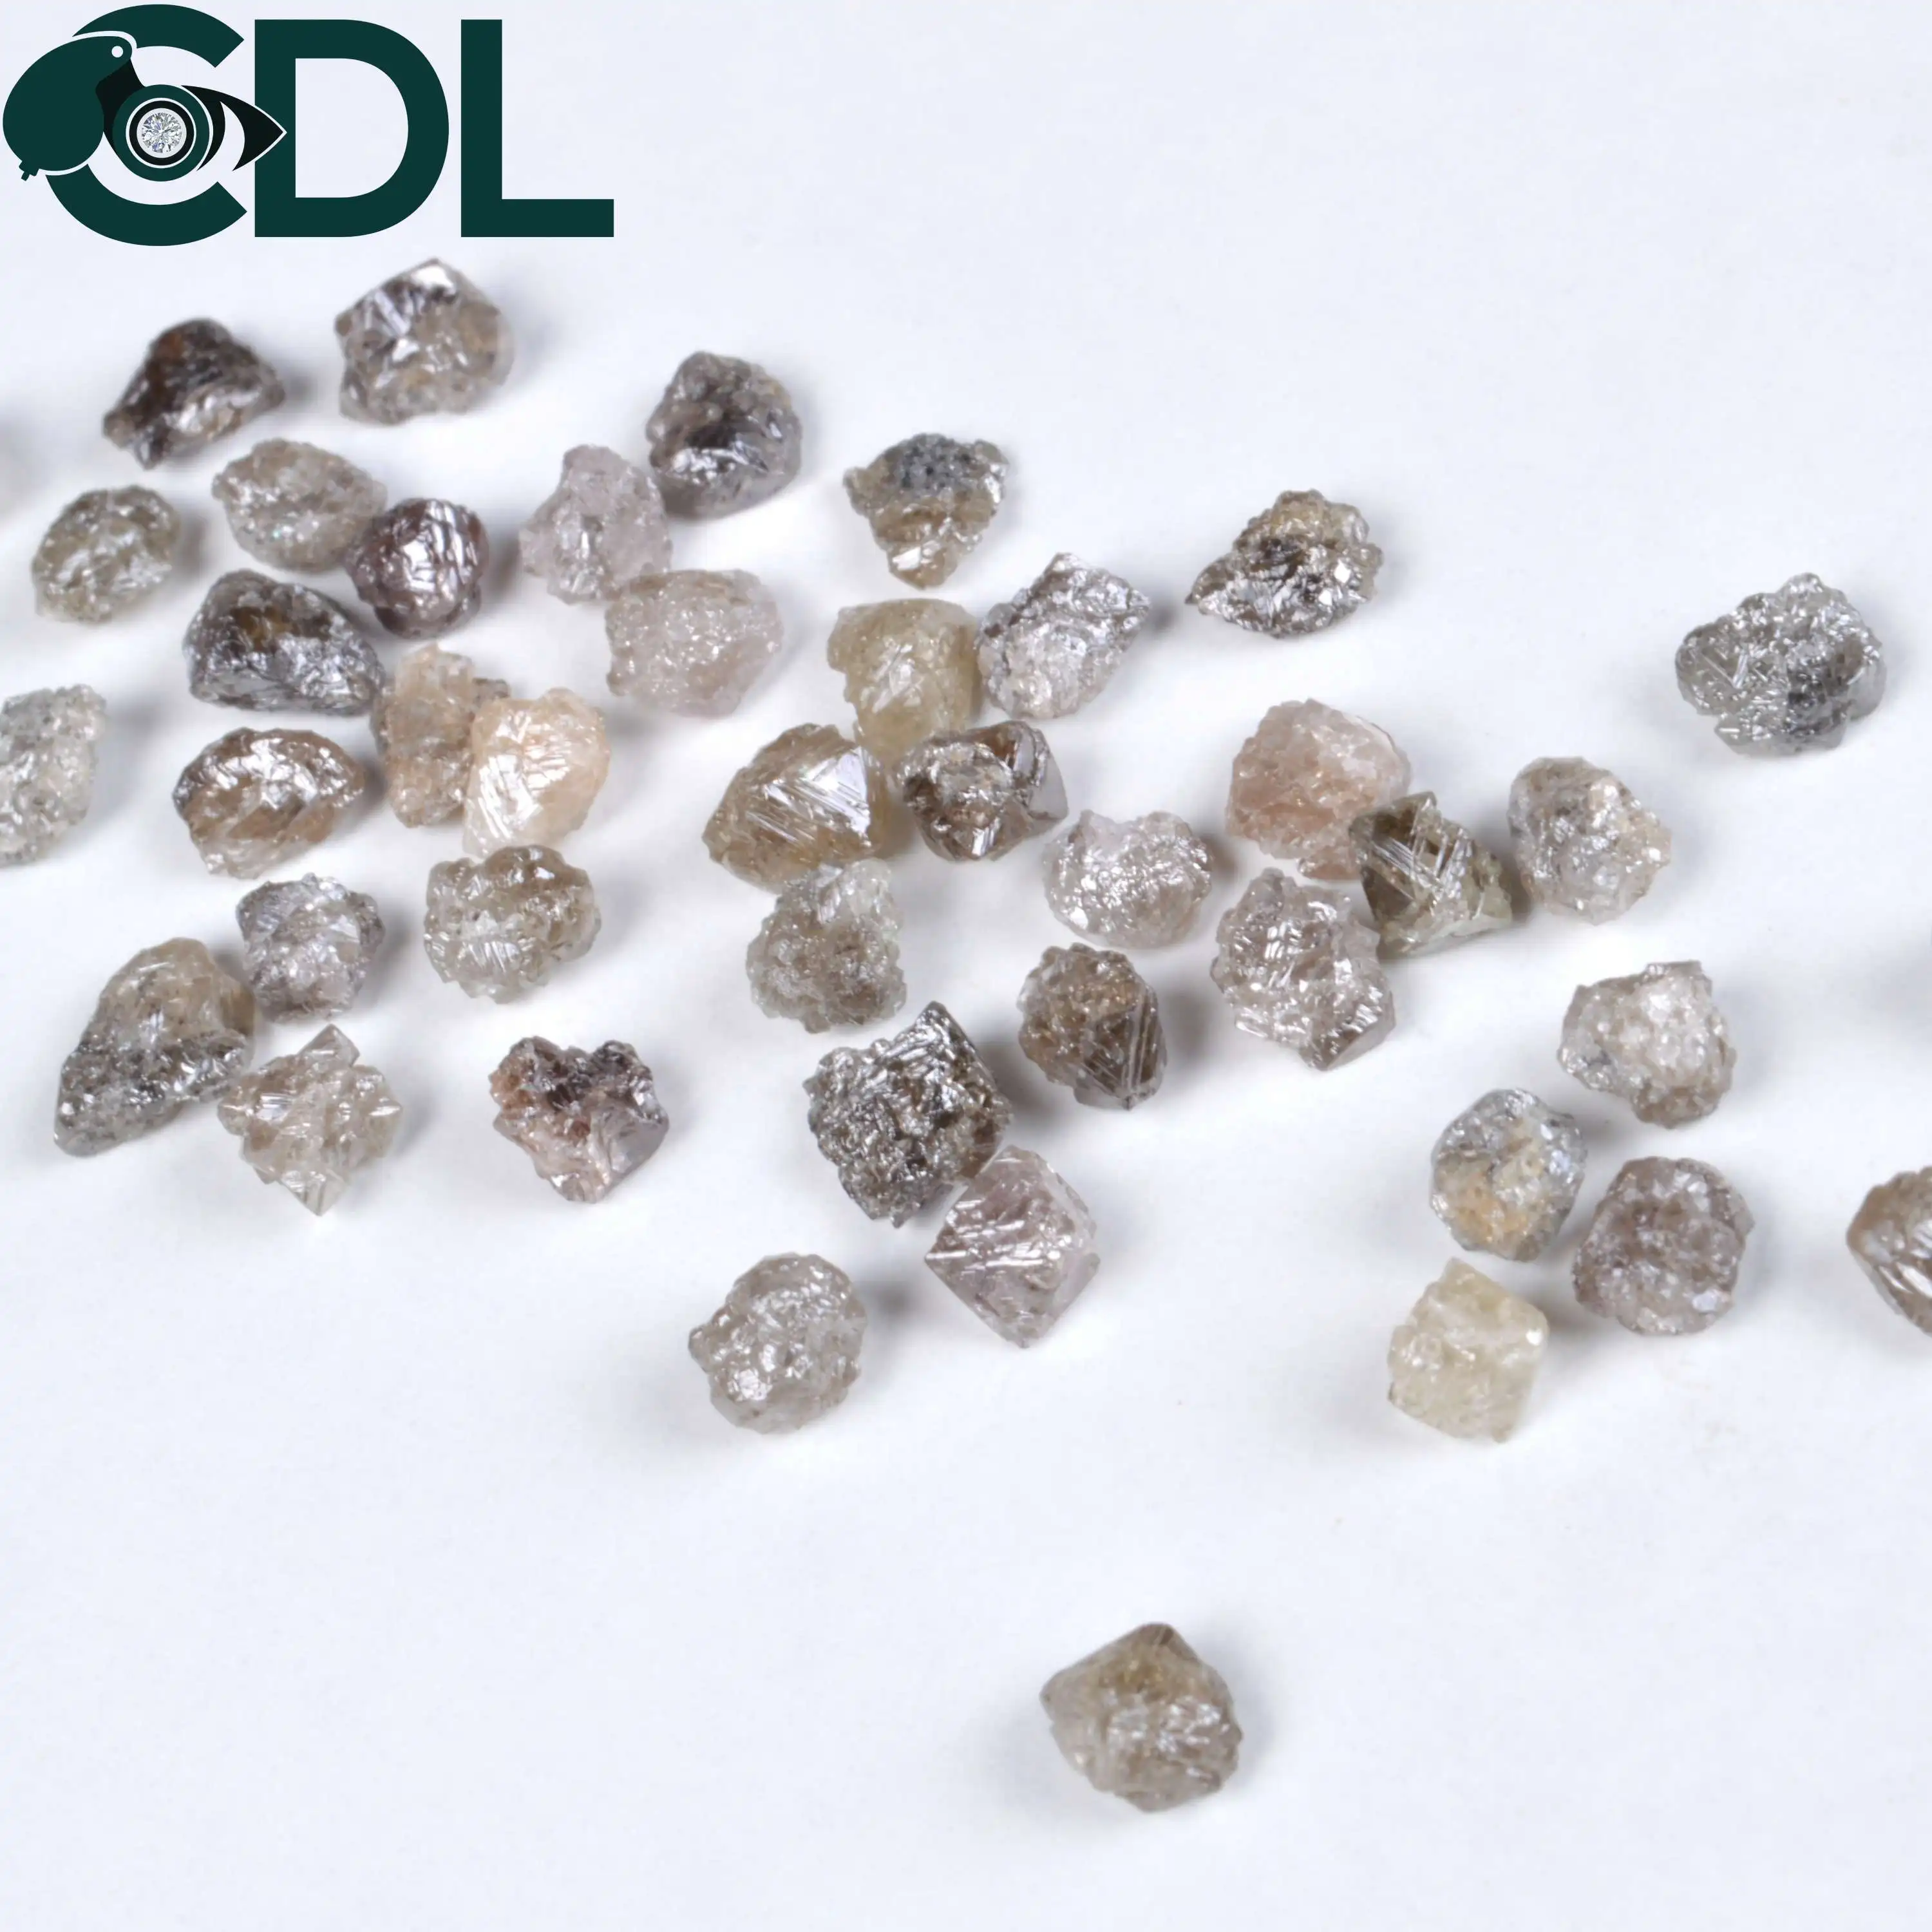 100% Real Industrial Rough Loose Diamonds Earth Mined Rough Diamonds | I3 Quality Natural Uncut Diamonds | Grayish Brown, 6.5 Mm (50042281039)